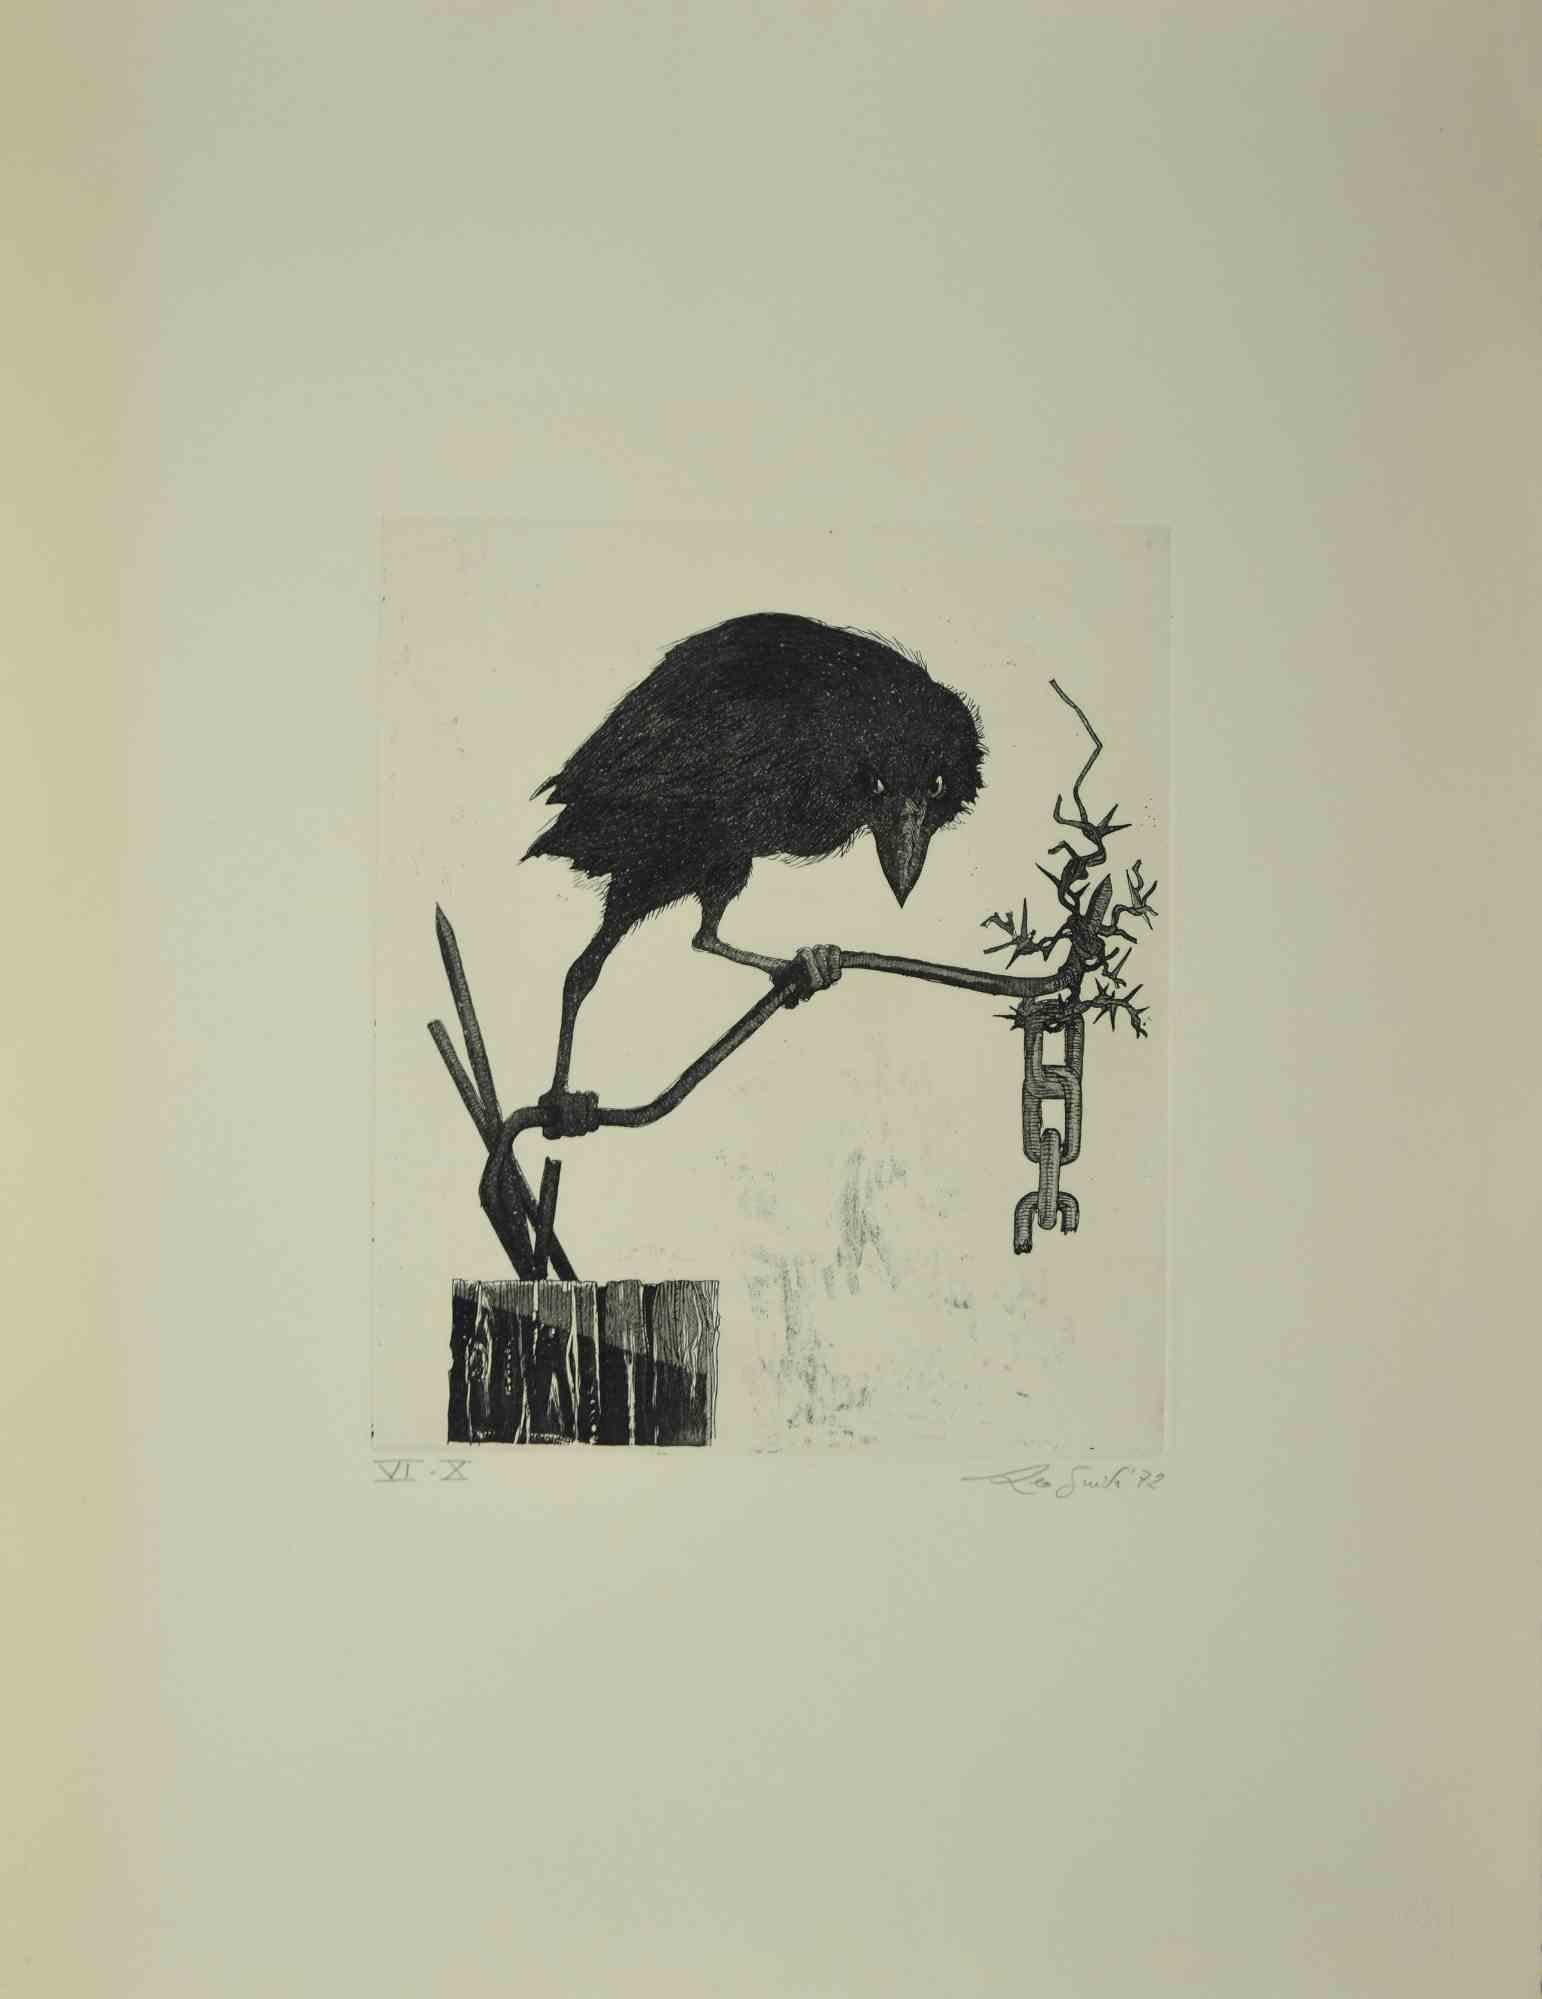 The Crow - Original Etching by Leo Guida - 1972